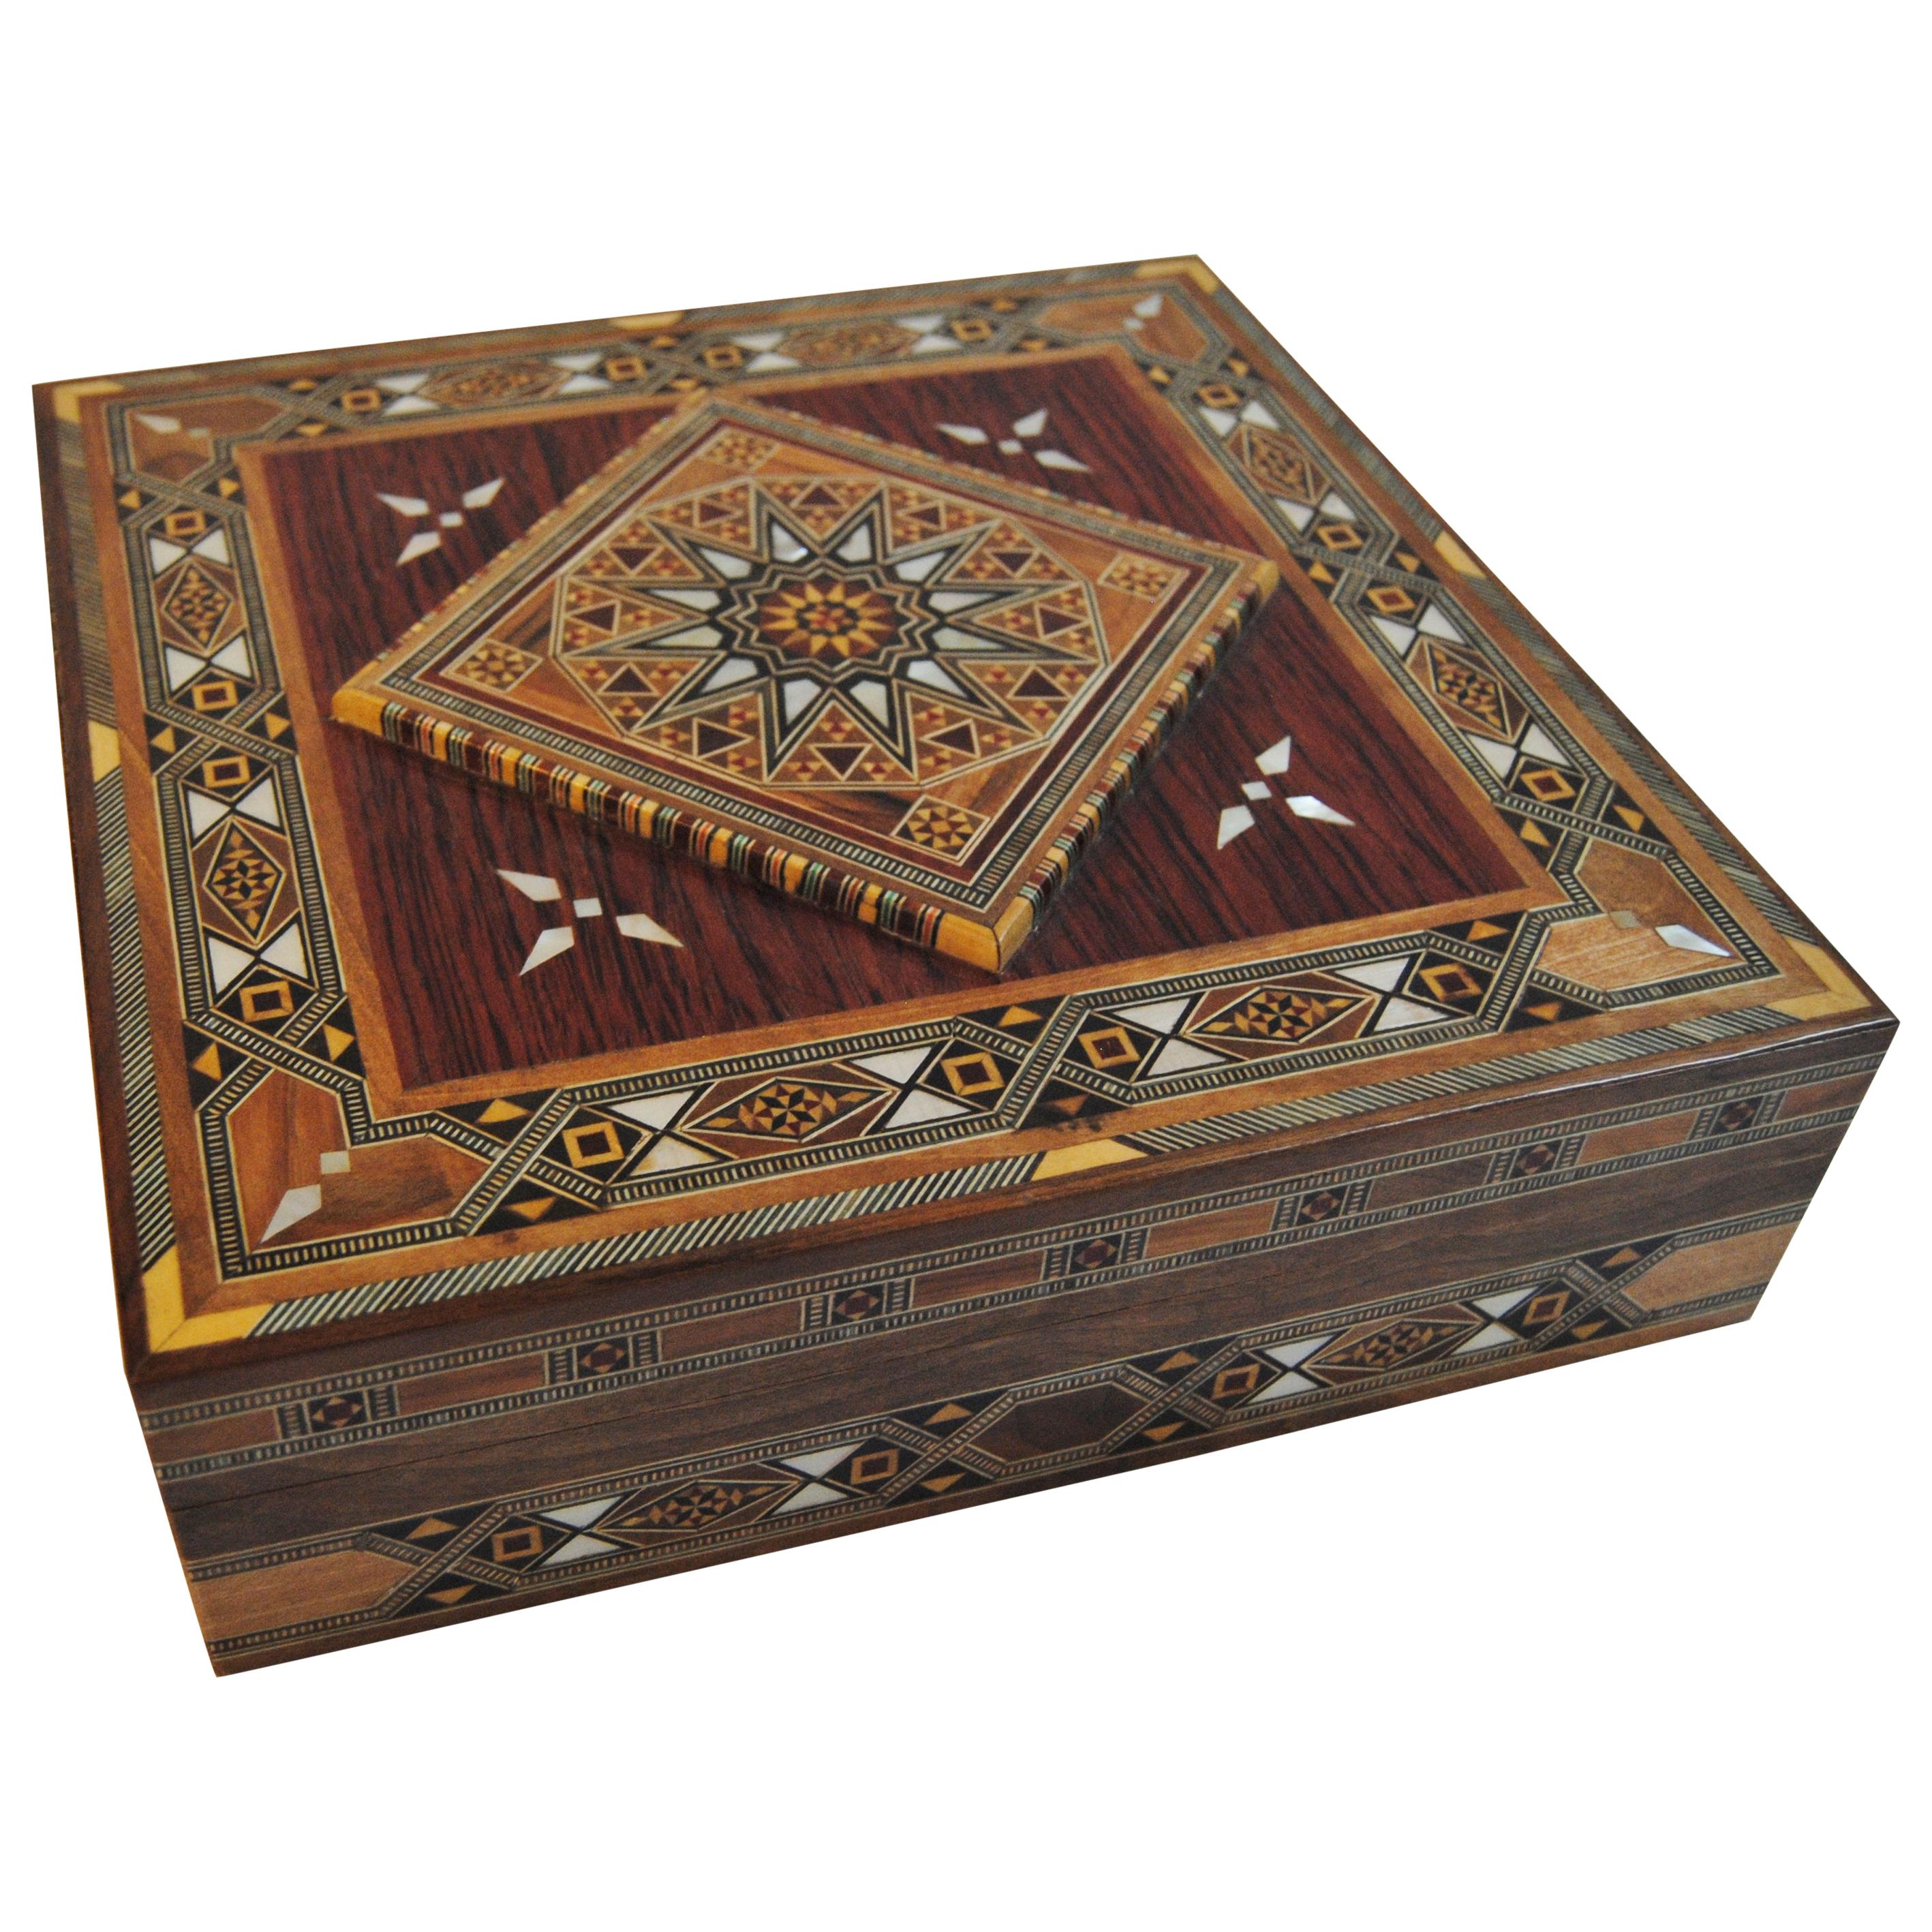 Syrian Walnut Wood Box Inlaid with Mother of Pearl and Cream Leather Lining For Sale